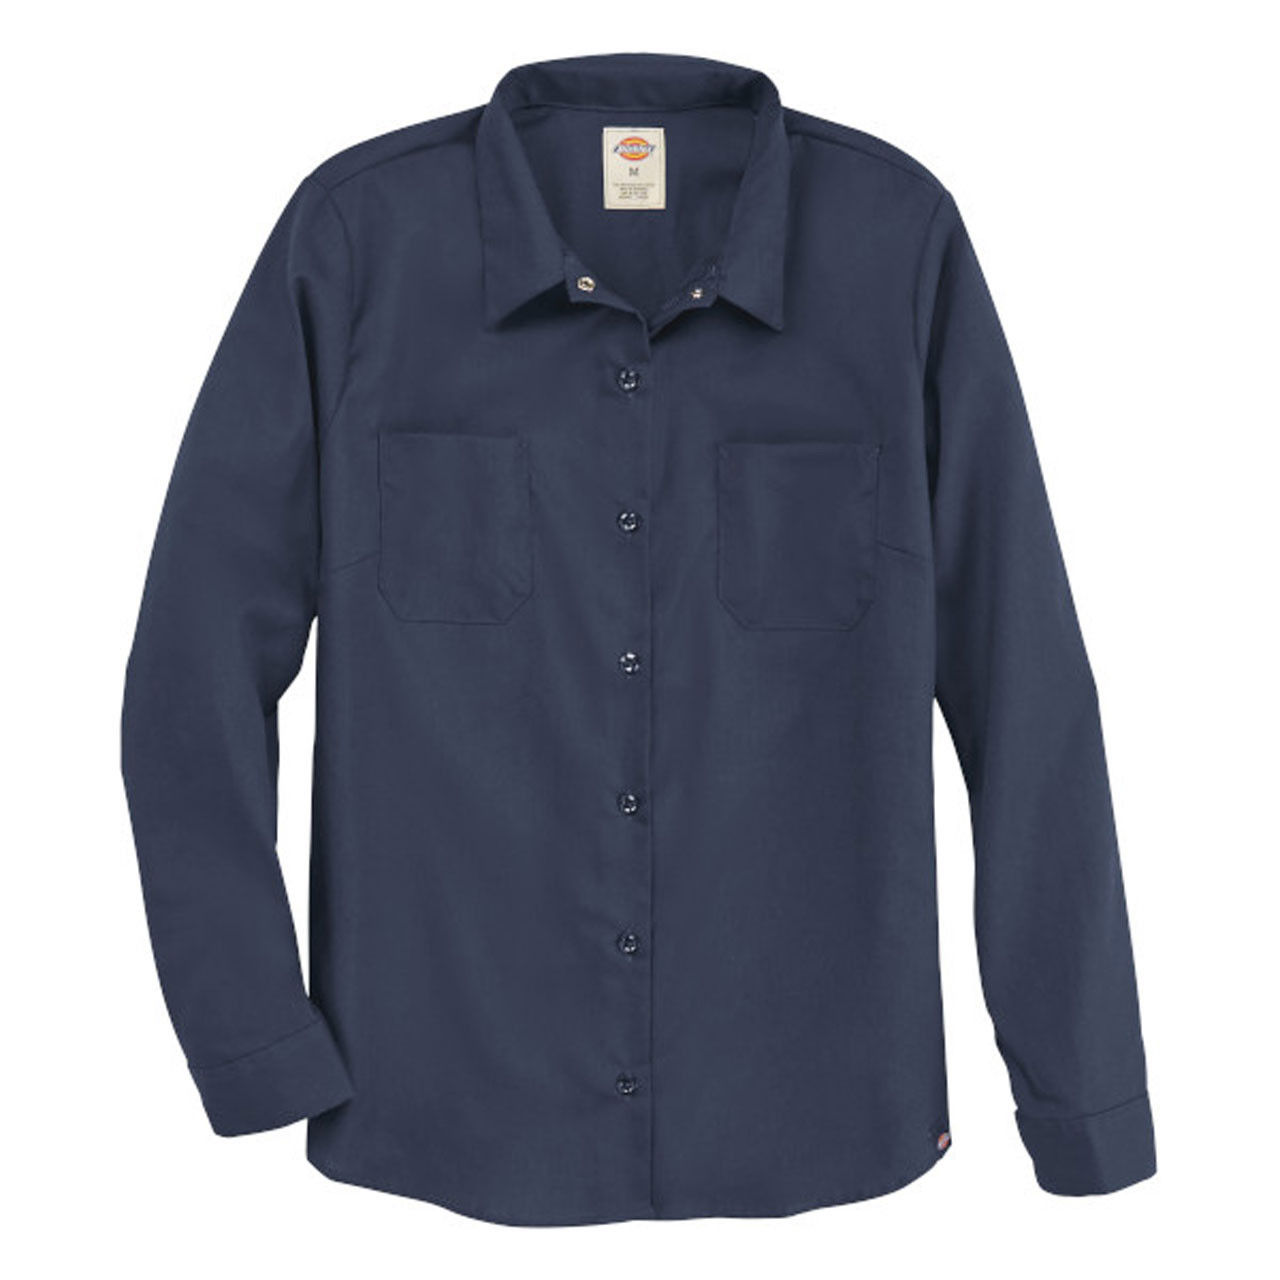 What fabric are the dickie long sleeve work shirts made from?